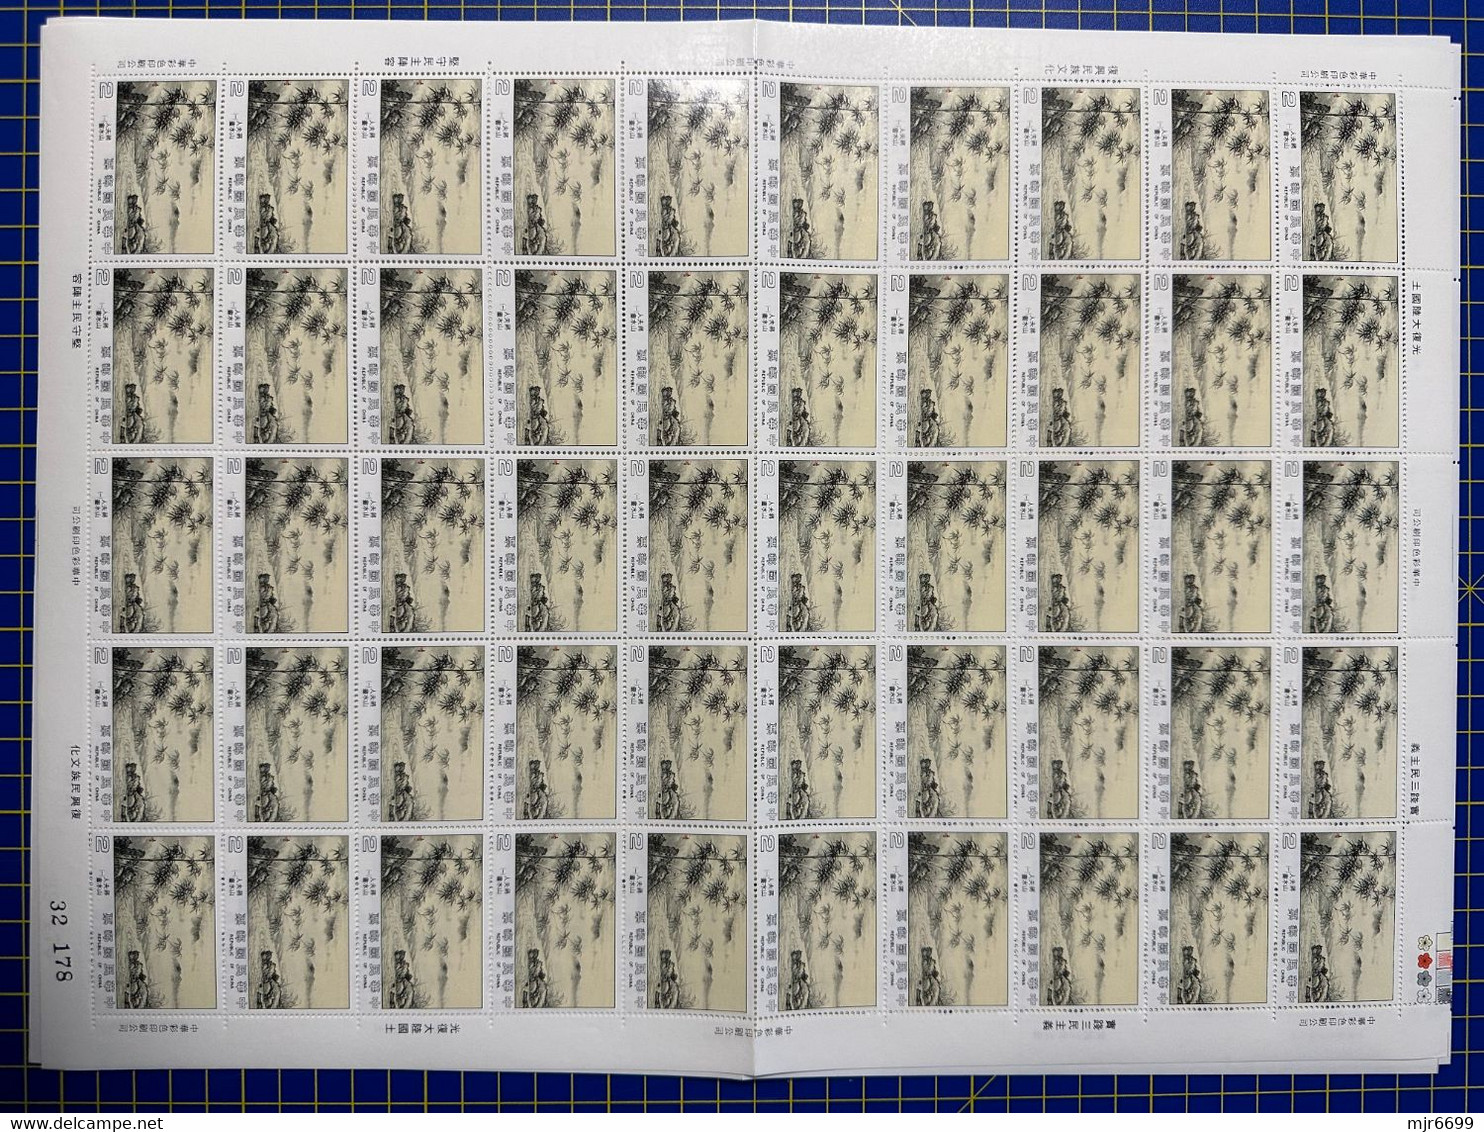 REPUBLIC OF CHINA/TAIWAN "MADAME CHIANG KAI-SHEK'S LANDSCAPE PAINTING STAMPS" SET OF 10, IN FOLDED SHEET OF 50 SETS - Verzamelingen & Reeksen